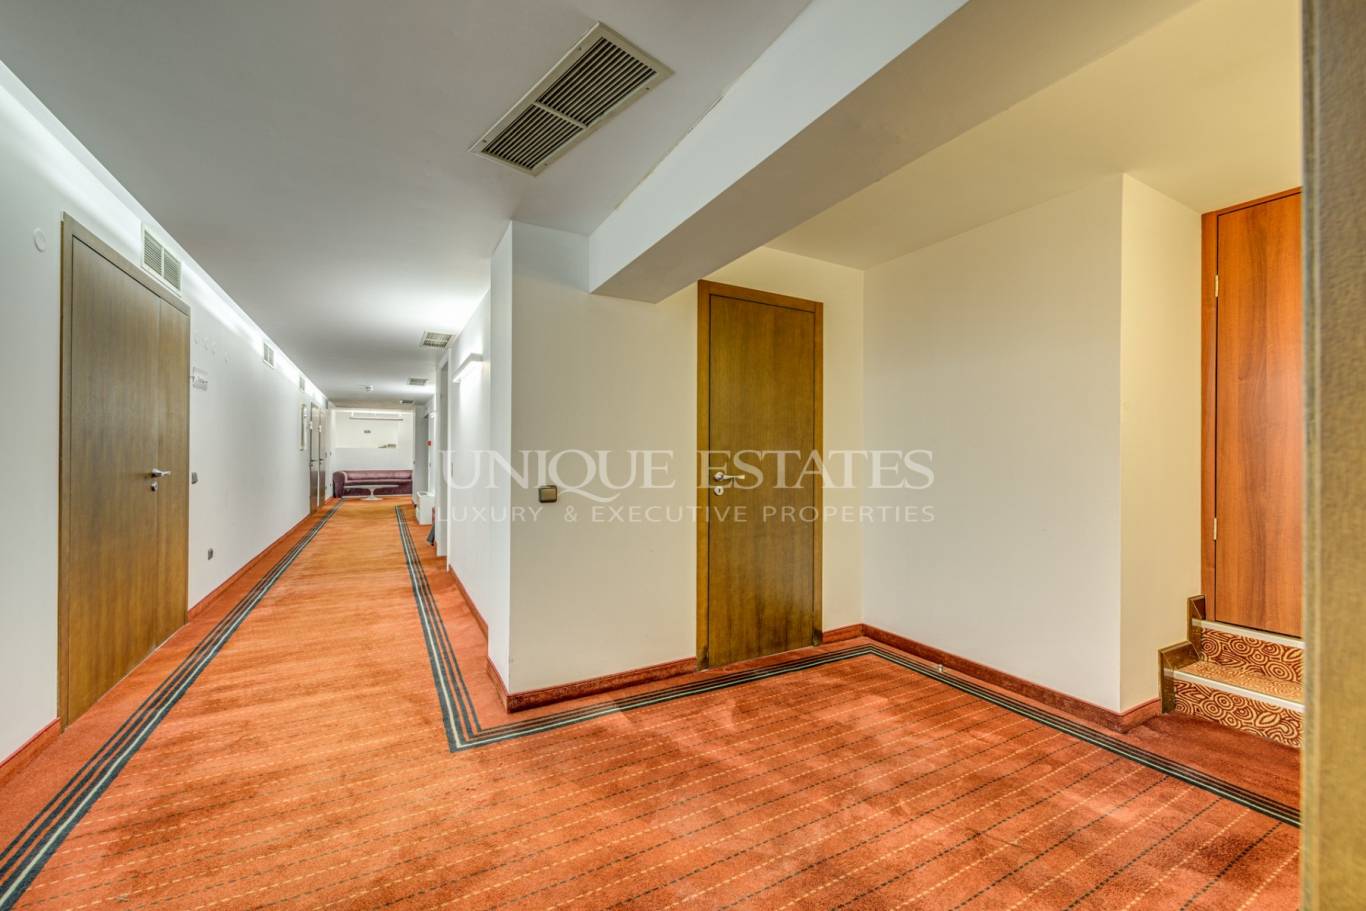 Office Building / Building for sale in Sofia, Downtown with listing ID: K13978 - image 4